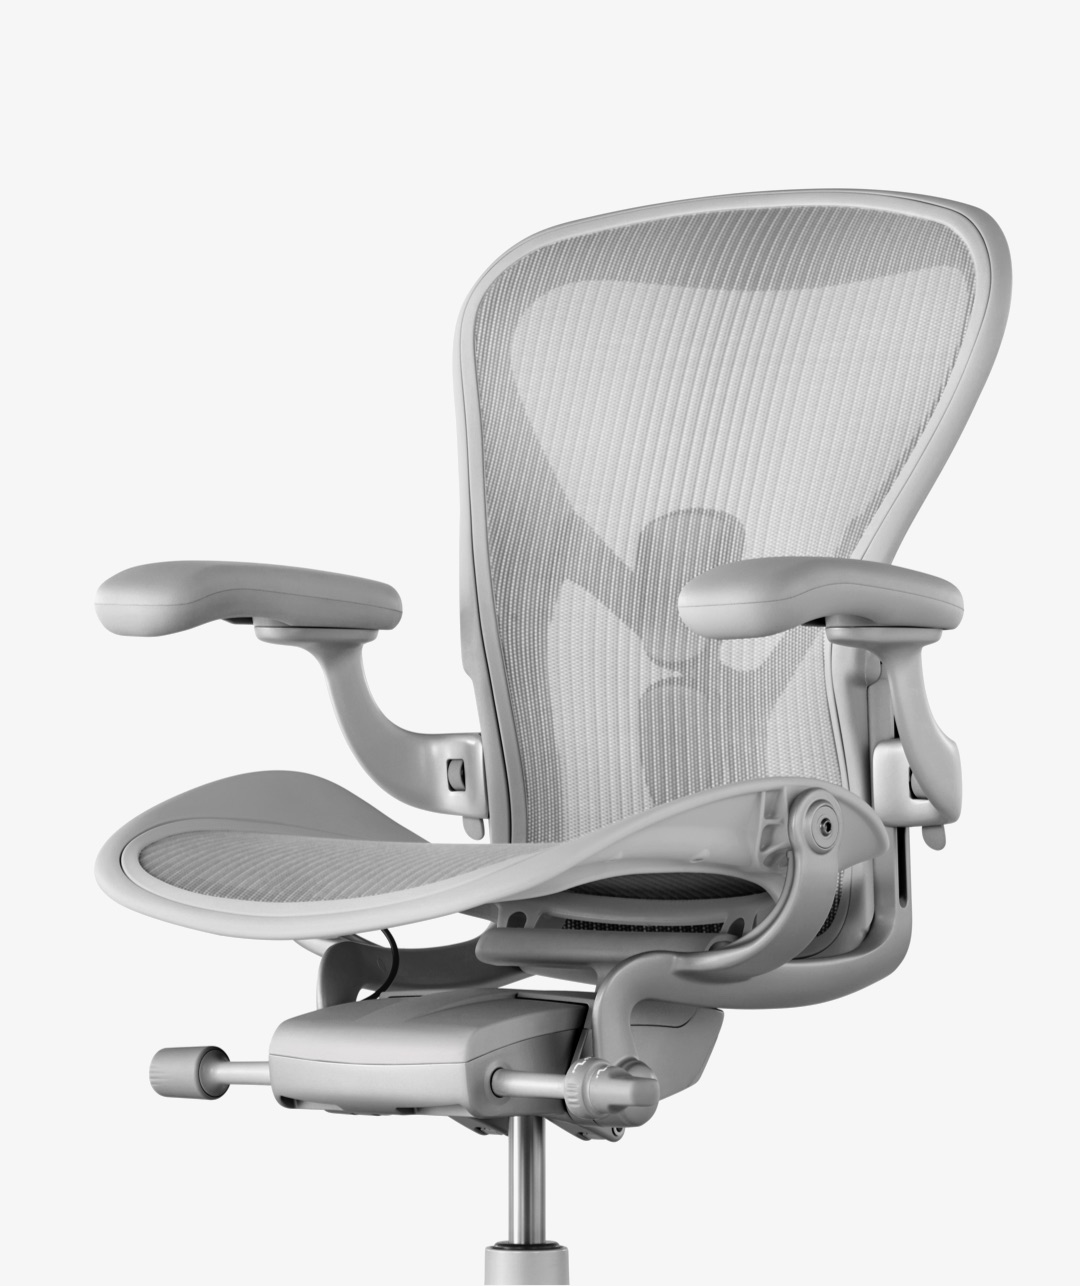 Photo of new Aeron chair in Mineral finish, from the tilt mechanism up